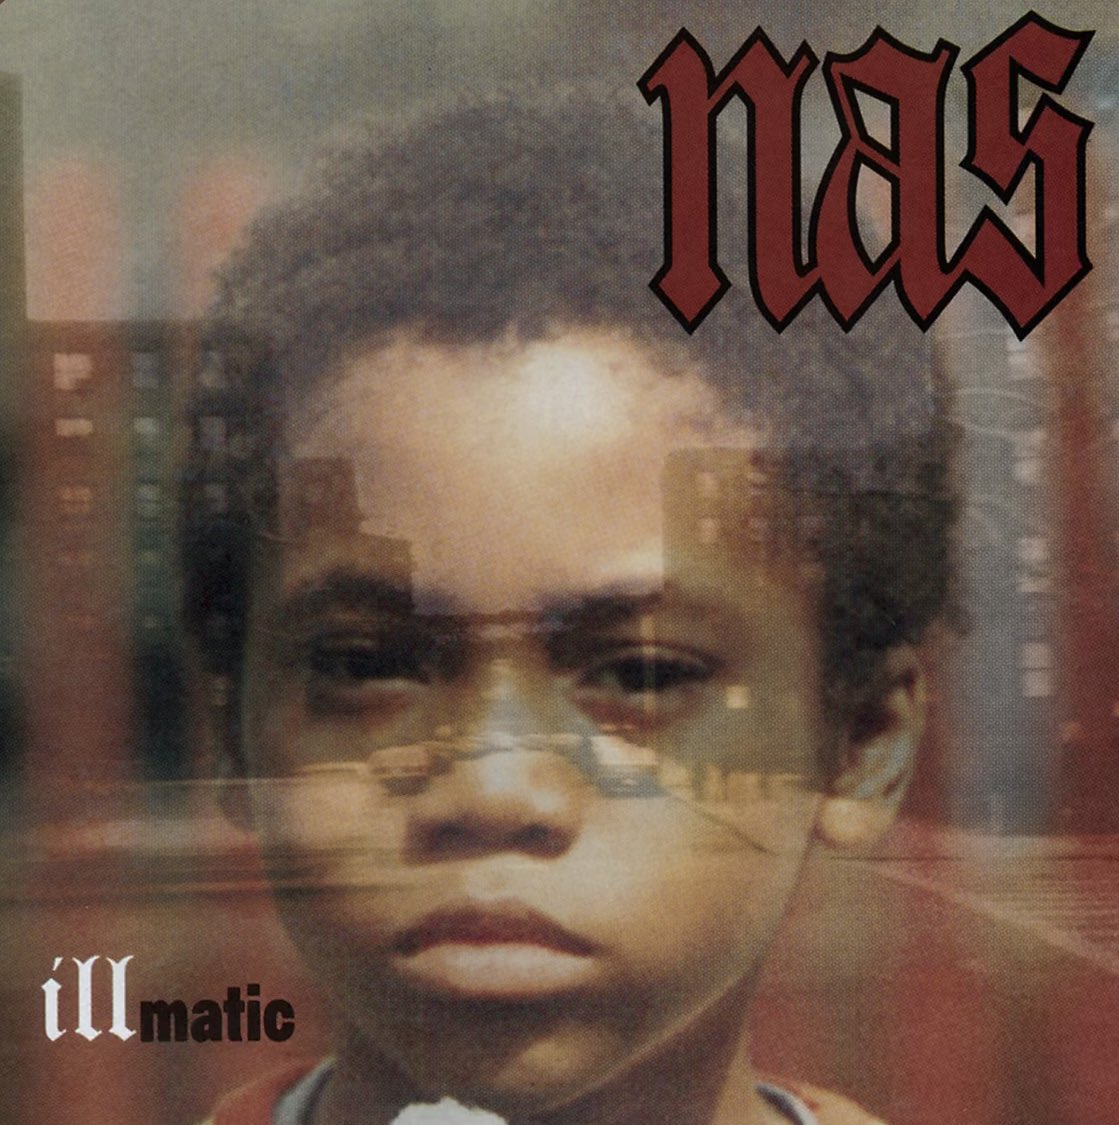 #illmatic30 #illmatic #nastynas #Nas #hiphop #hiphophead #oldschoolhiphop #classichiphop #eastcoasthiphop